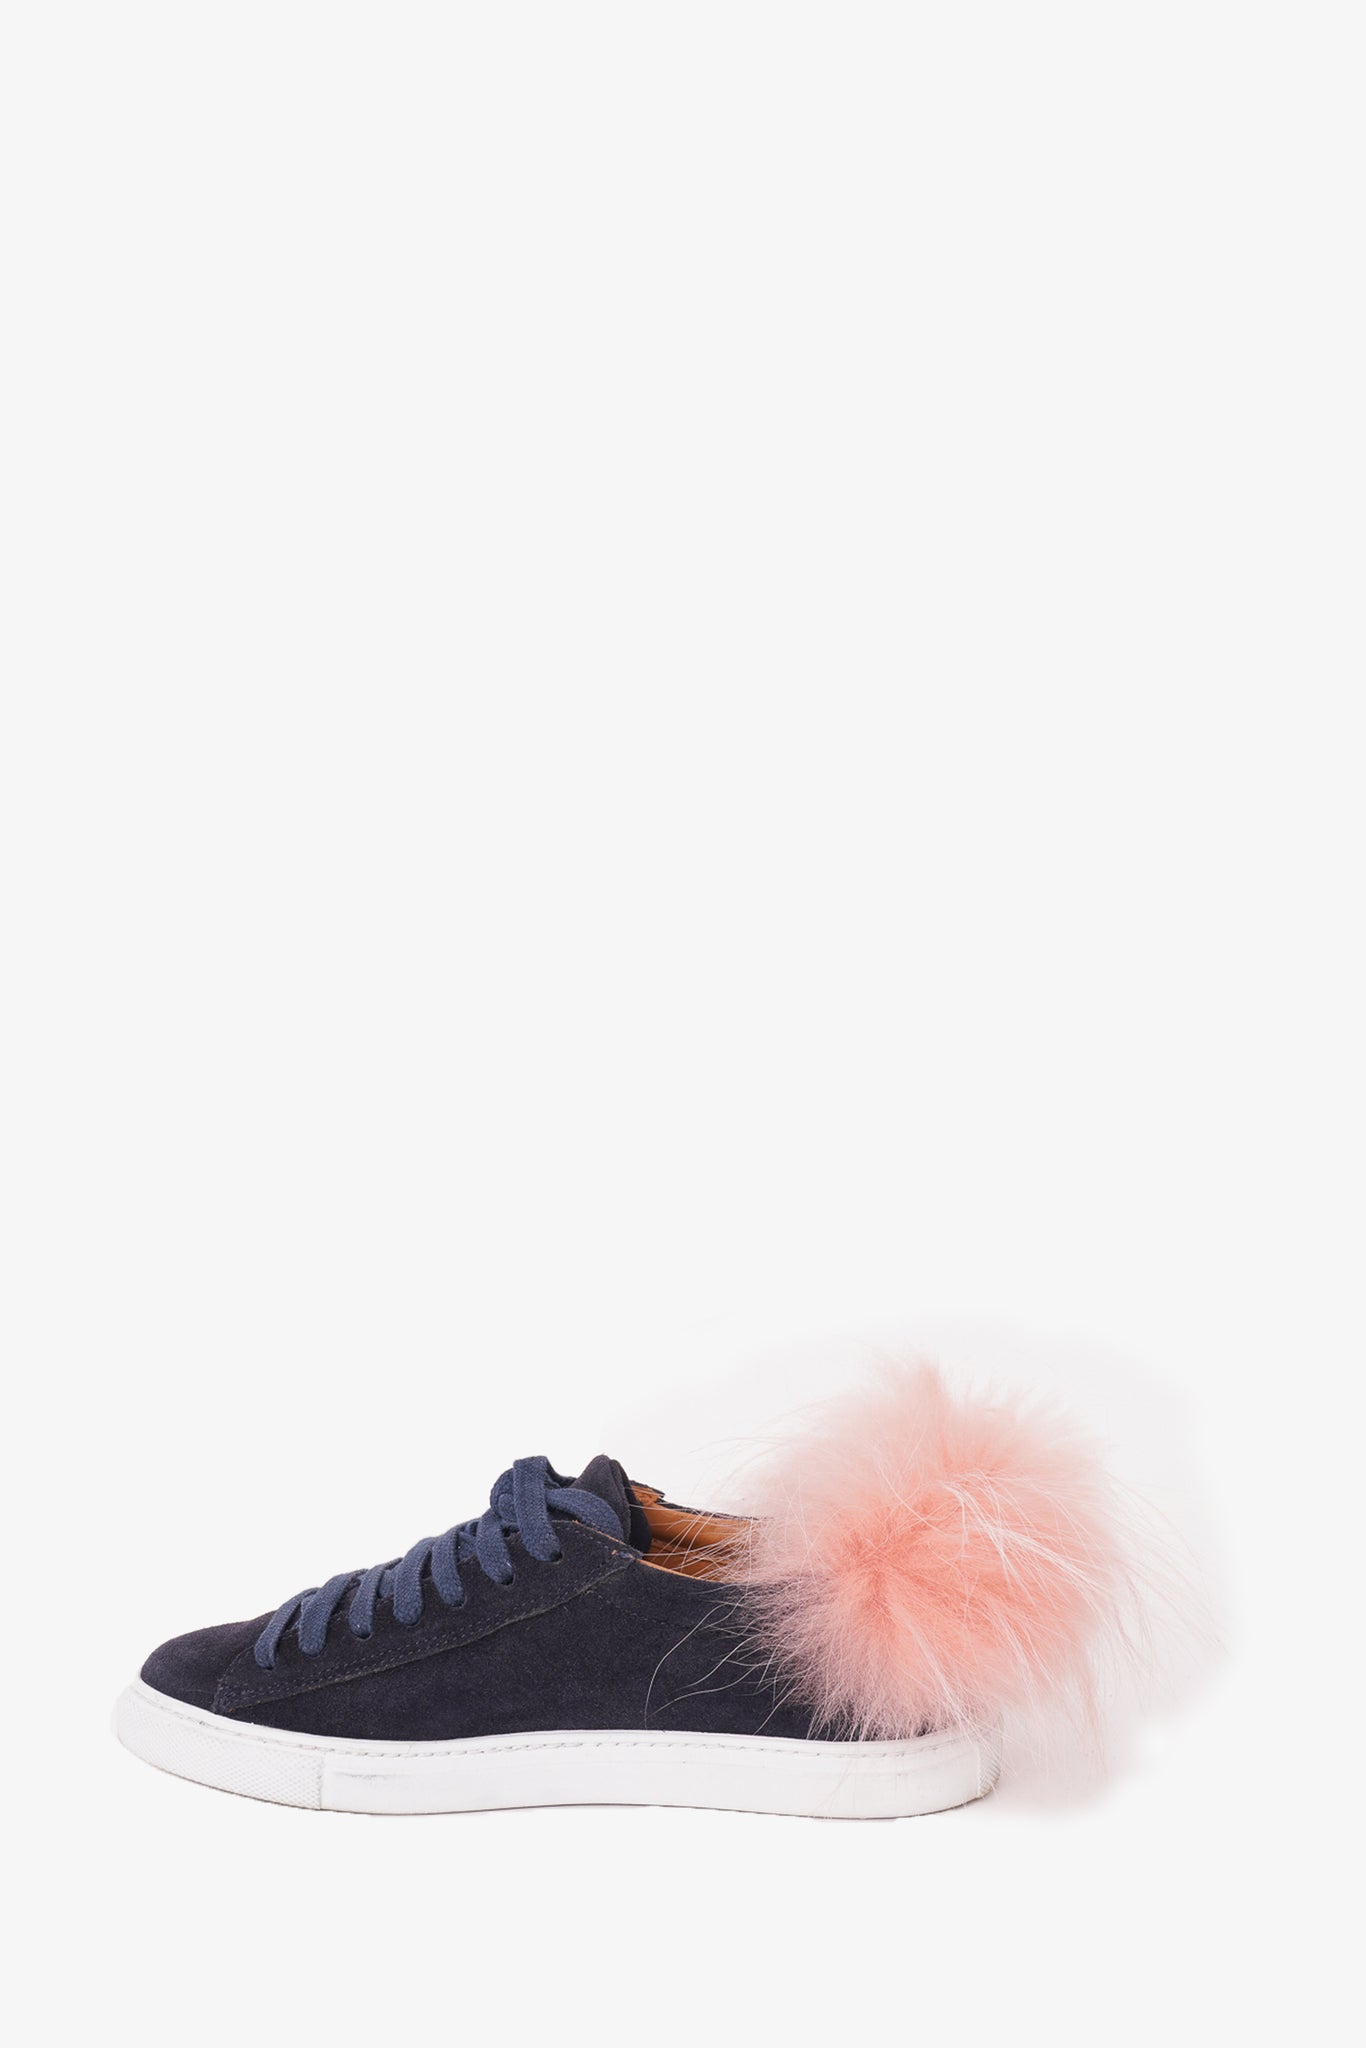 Mr&Mrs Black Suede Sneaker With Pink Fur Size 36